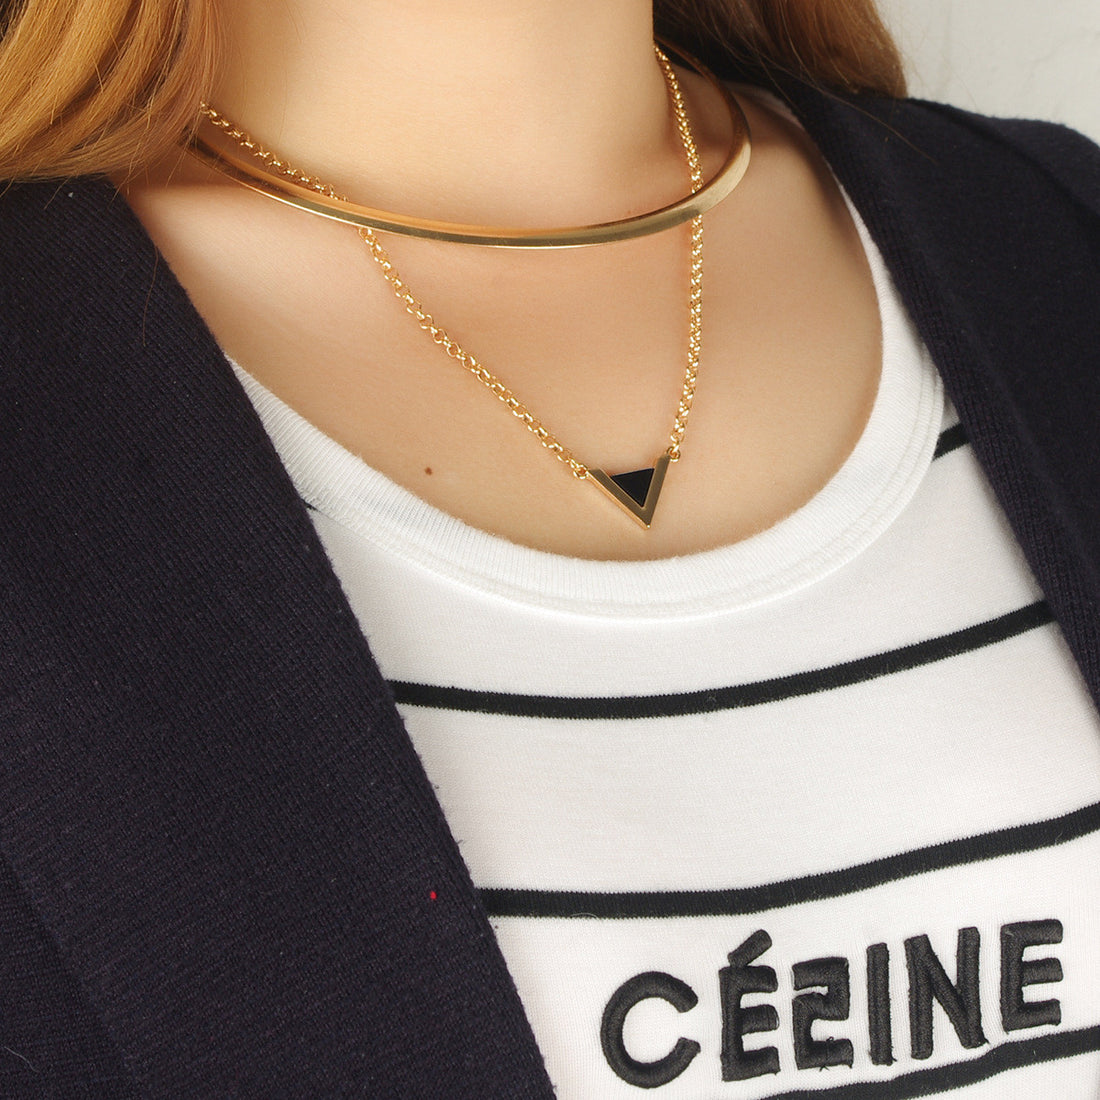 Geometry Triangle Pendant Loop Necklace - Oh Yours Fashion - 1